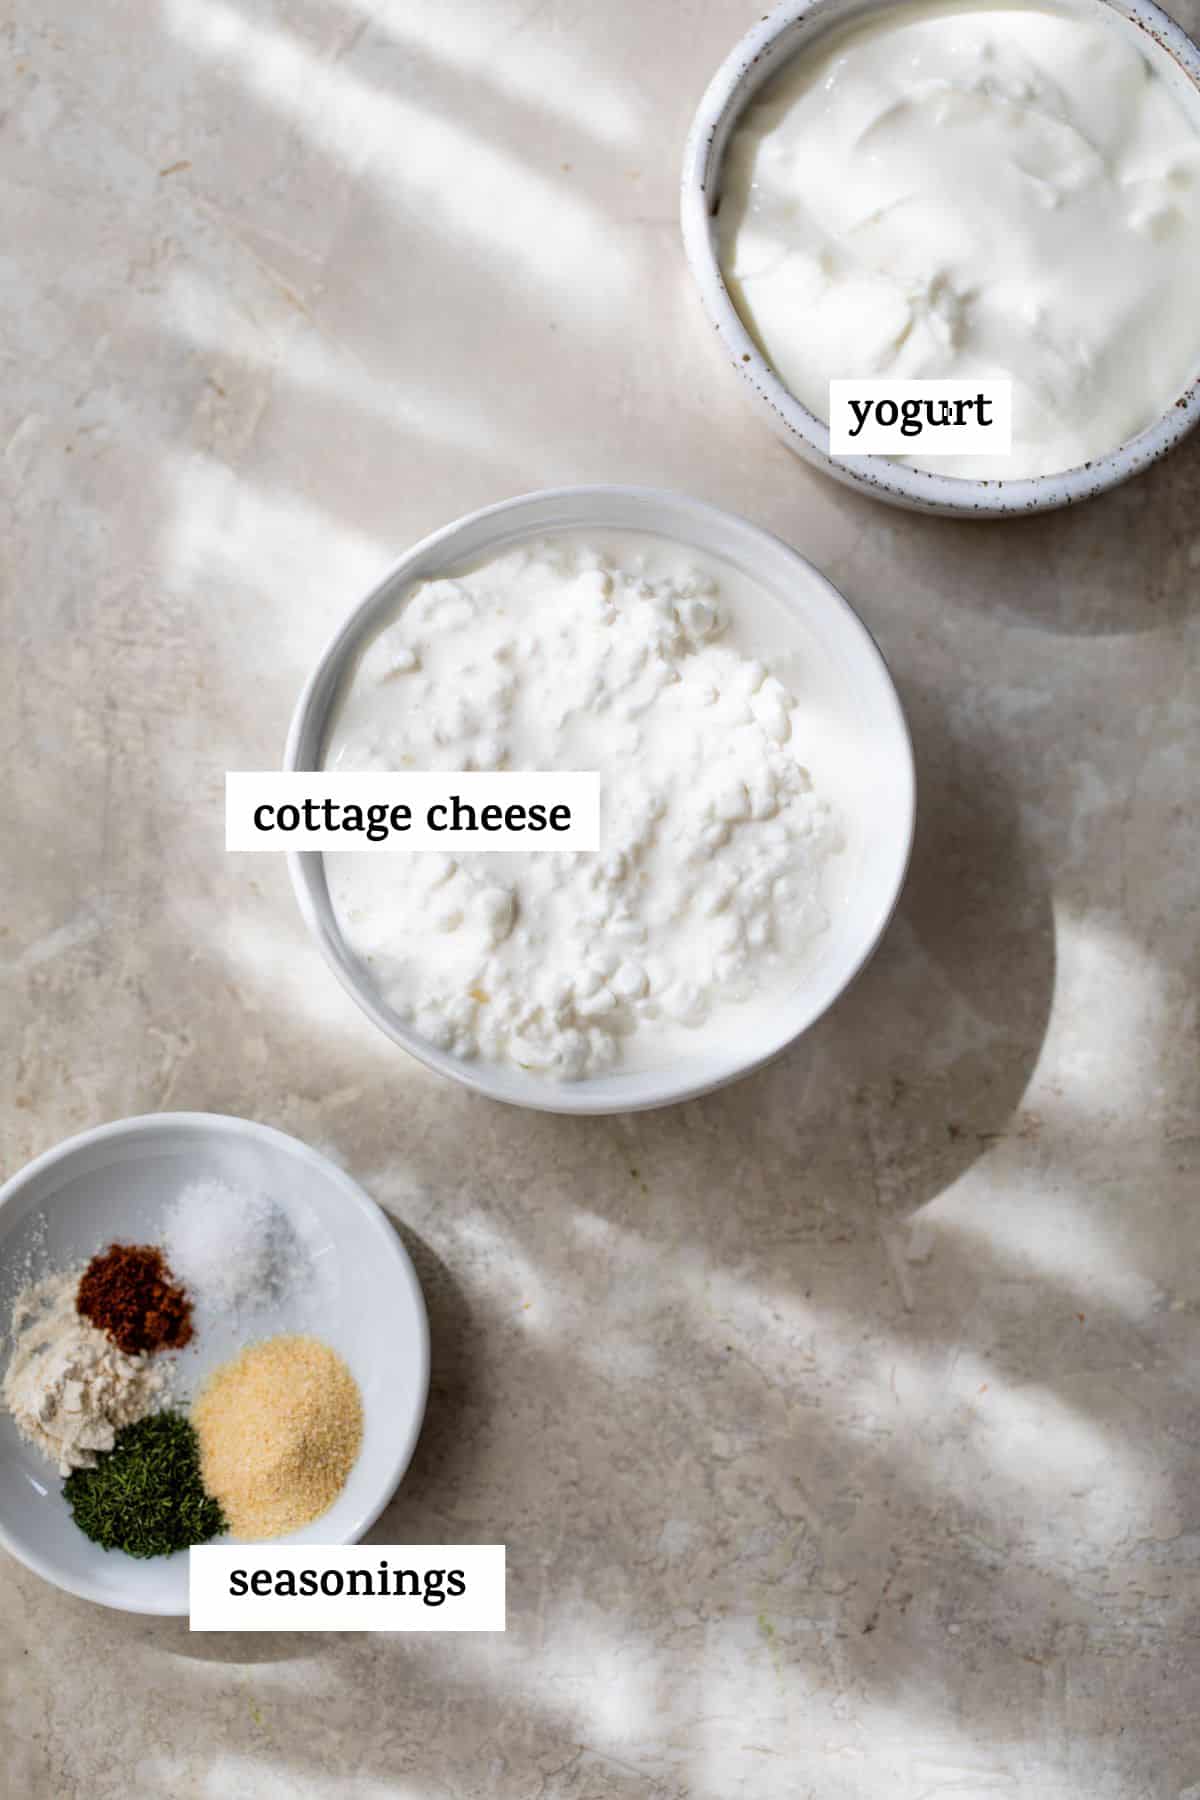 small bowl of yogurt, small bowl of cottage cheese and a small dish with seasonings on it